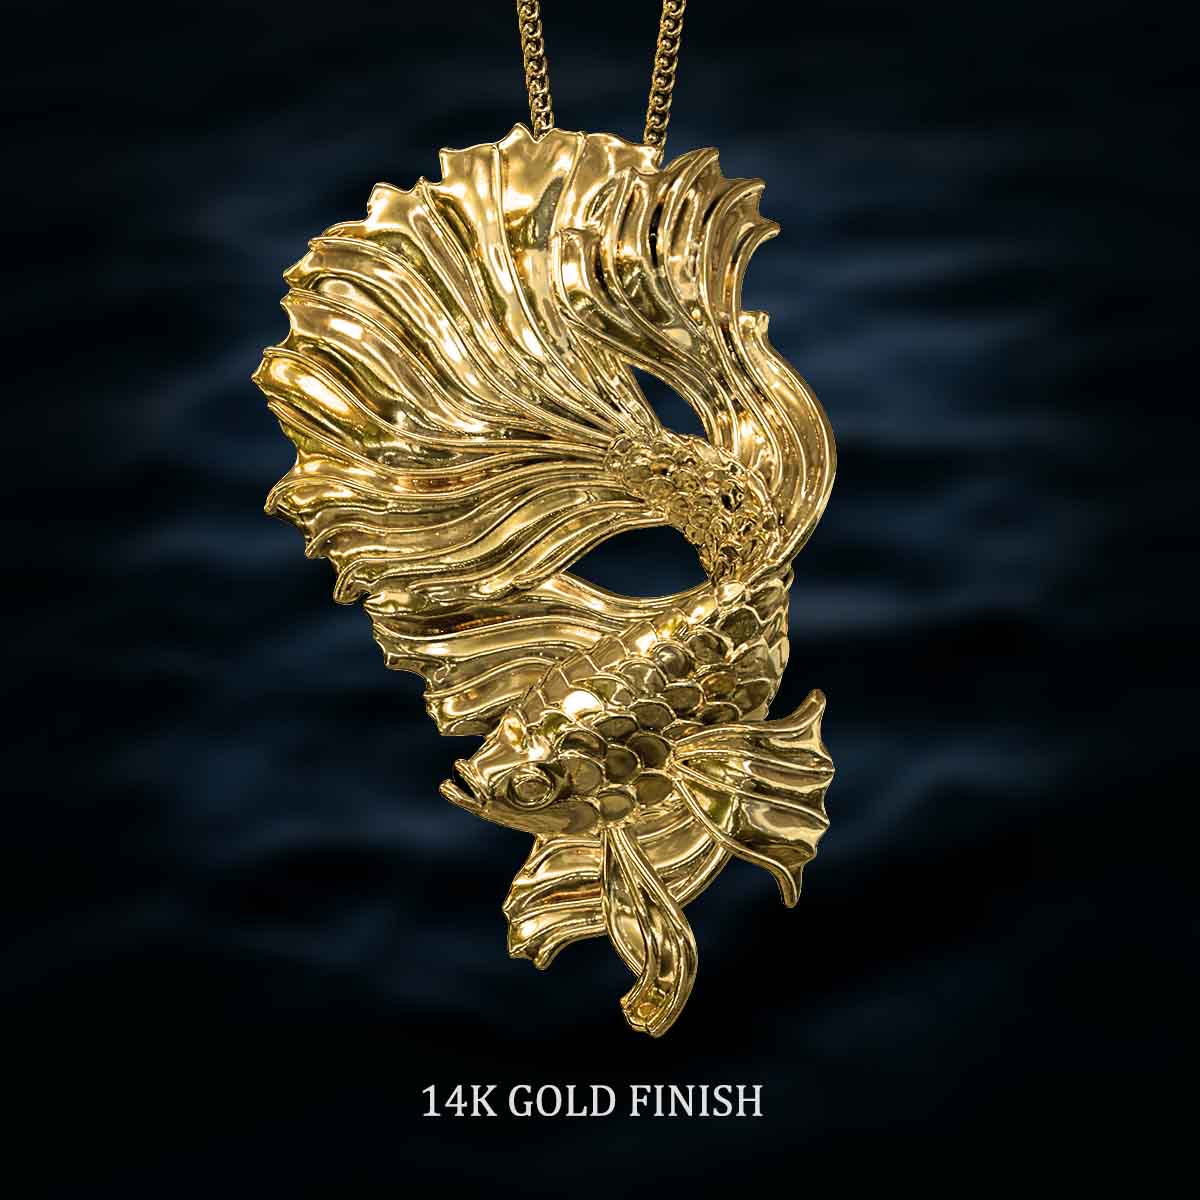 14k-Gold-Finish-Betta-Fish-Pendant-Jewelry-For-Necklace